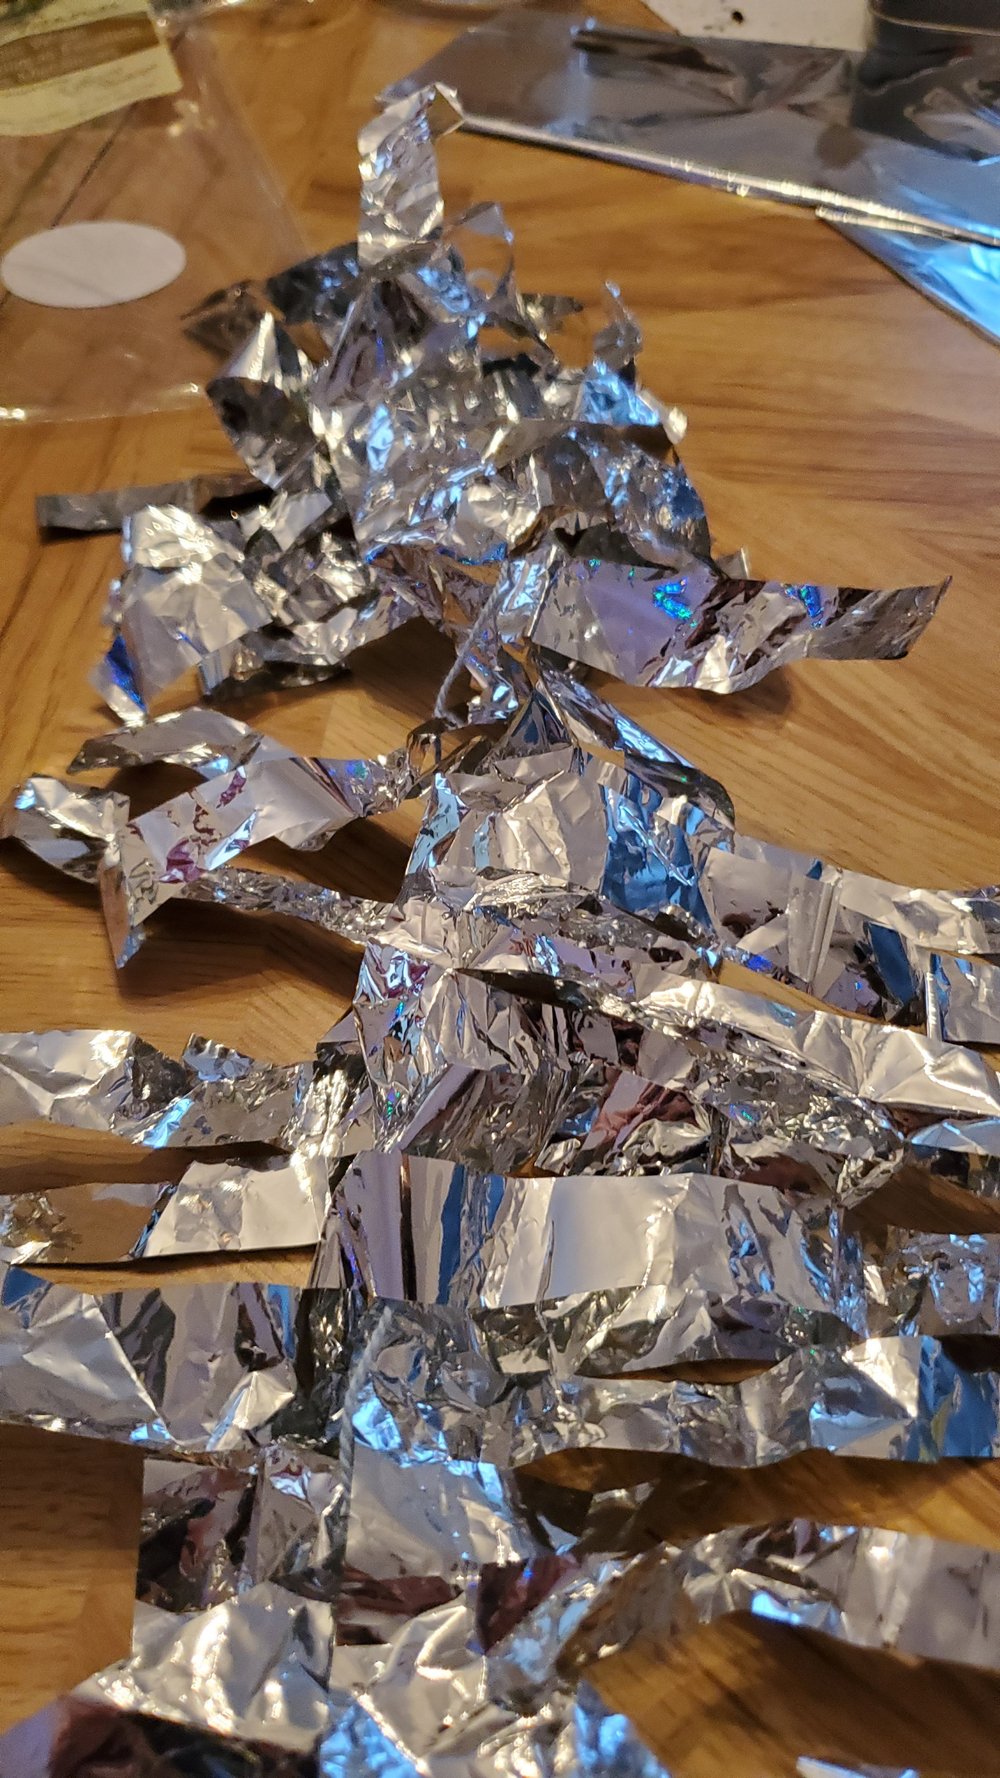  Wrap the foil around the string. 